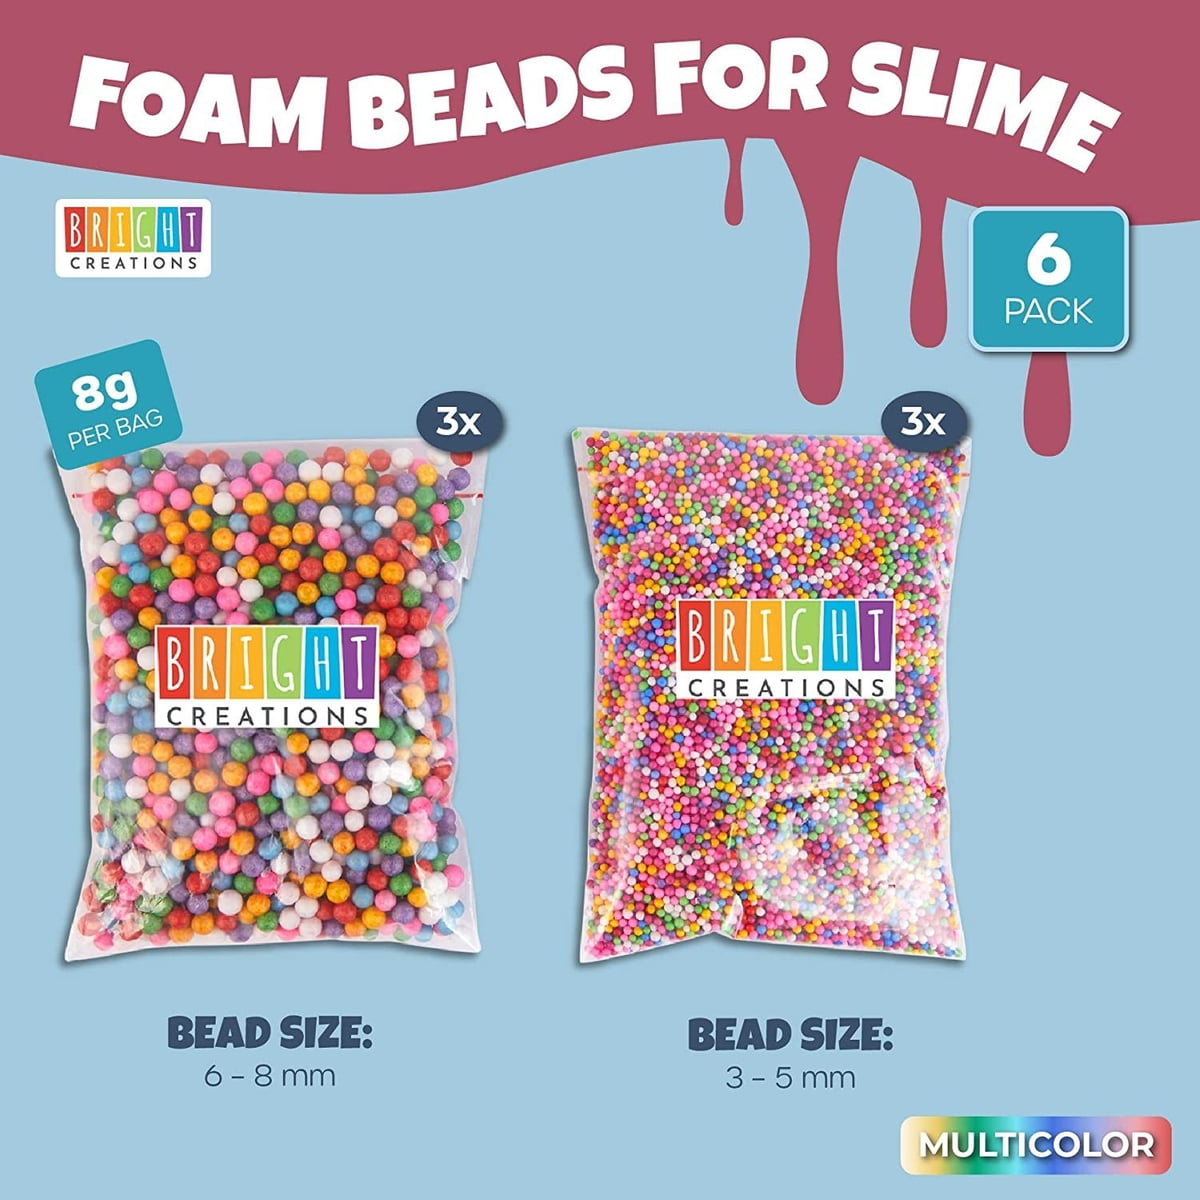 Bright Creations Rainbow Foam Beads for Slime, Art, Crafts Supplies (0.3 oz, 6 Pack, 75,000 Pieces)